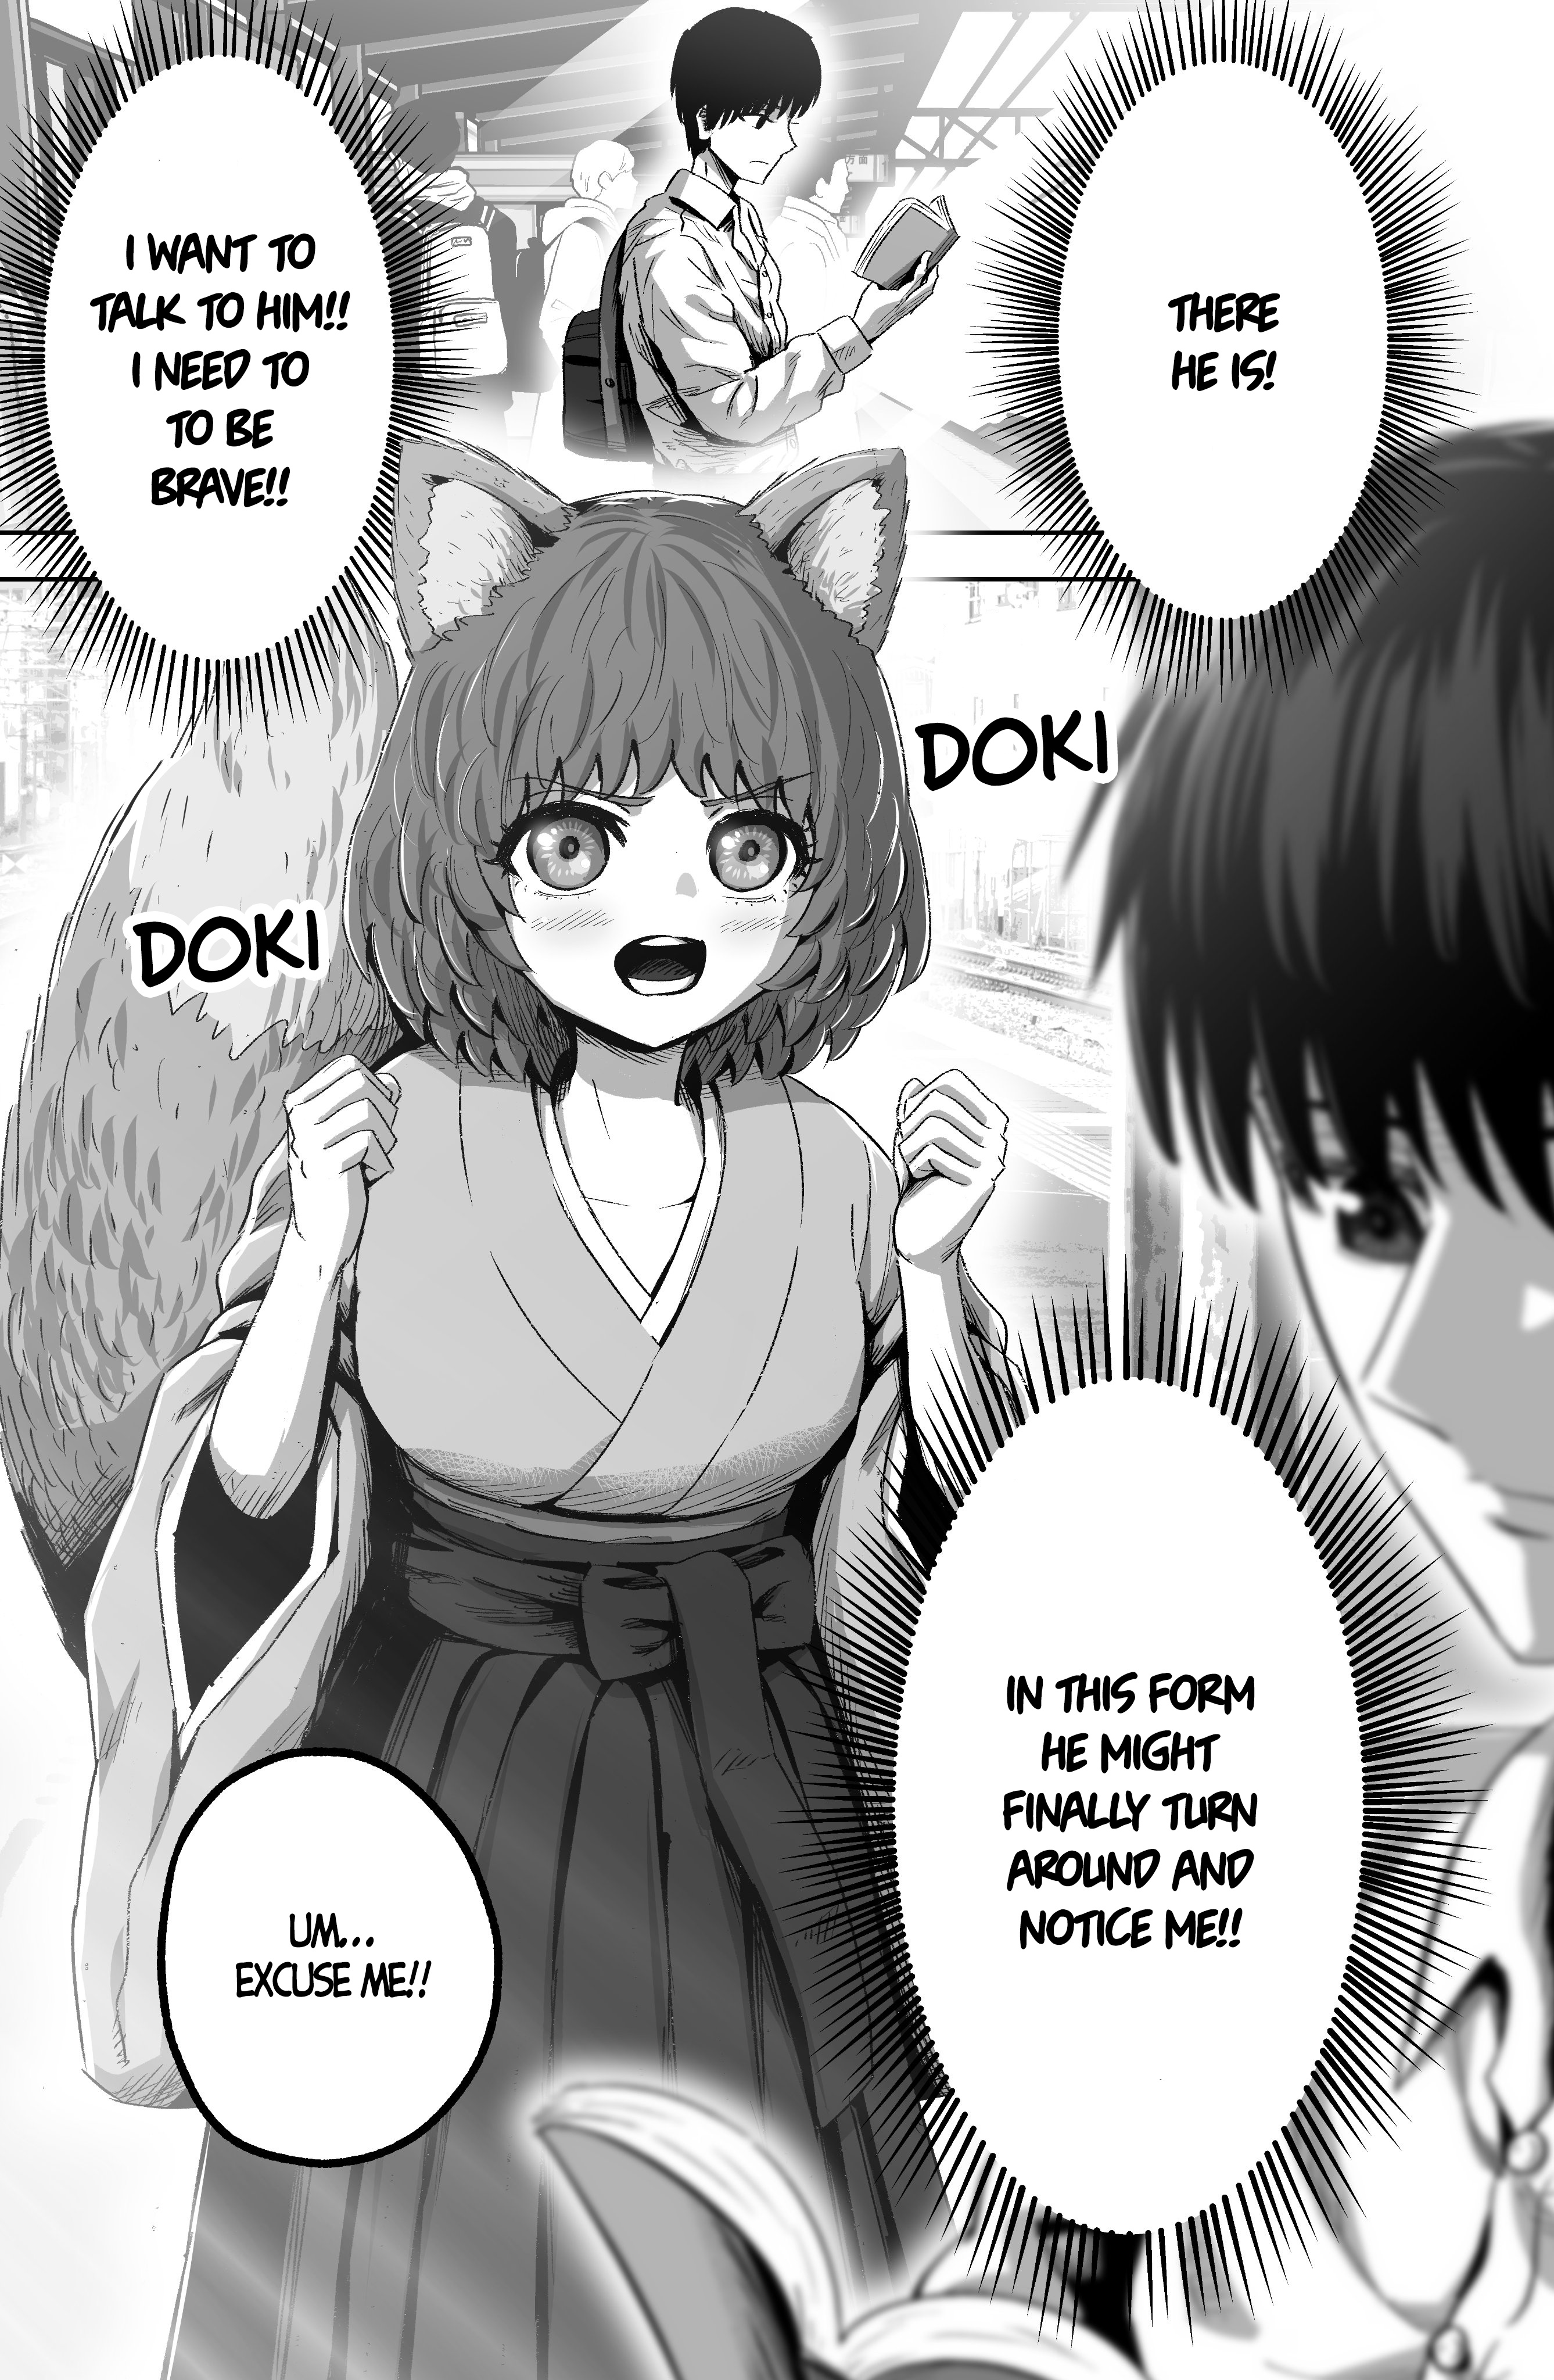 The Fox Girl Who Wants To Get Chummy With The Human Boy She Likes - Page 2